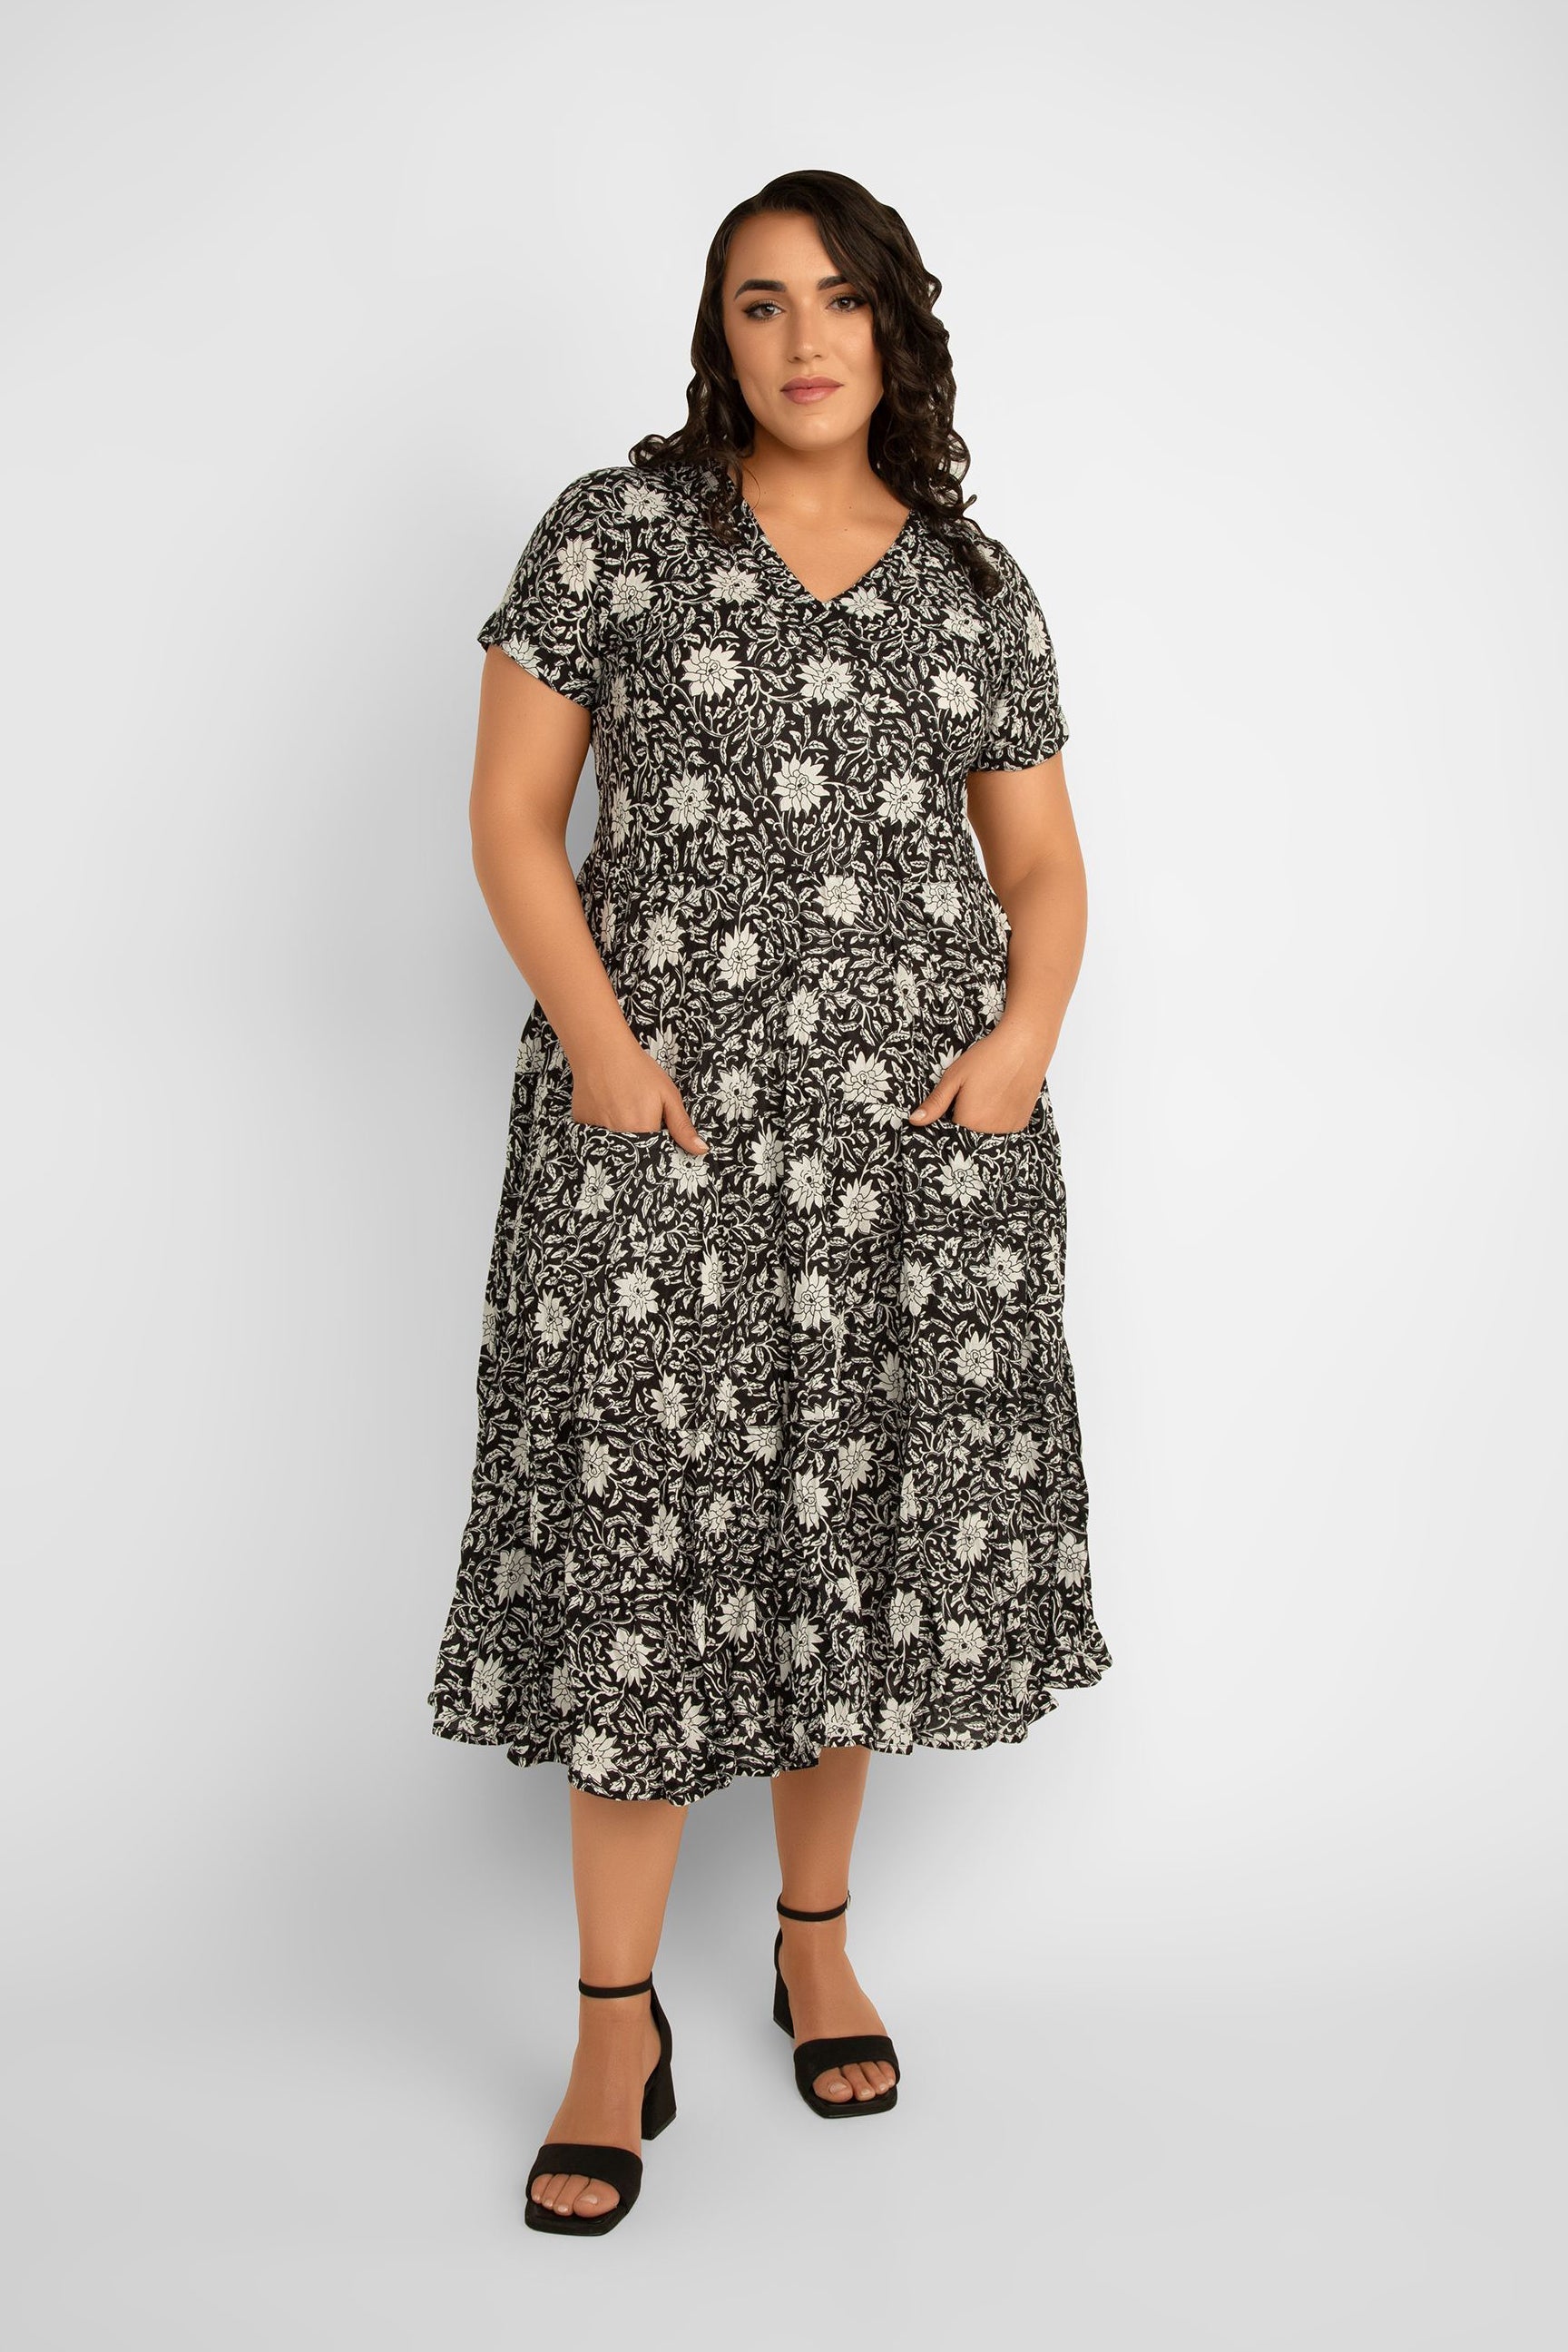 Dress Addict Jazi Short Sleeve V-Neck Tiered Midi Dress with Pockets in Black & White floral print